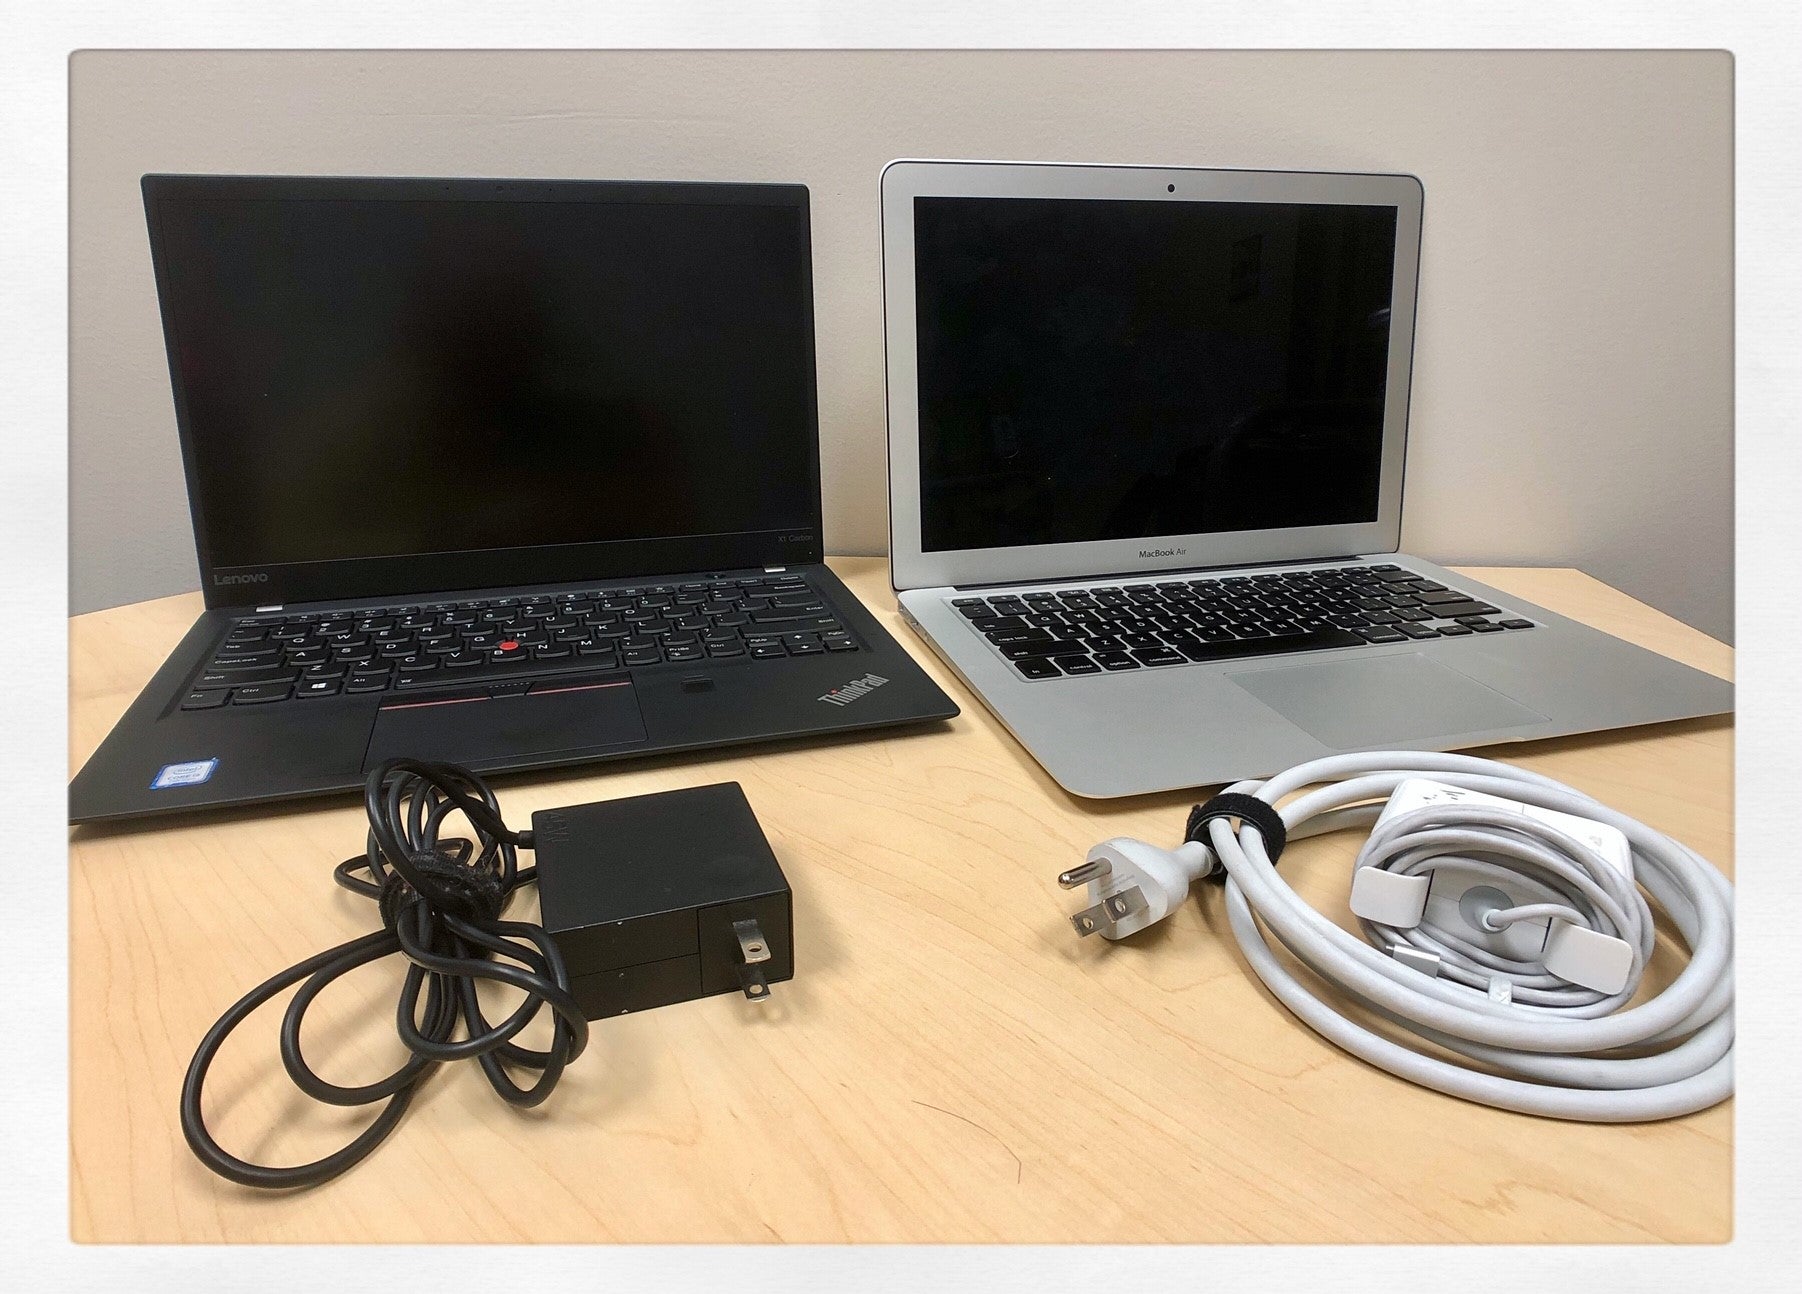 PC laptop with charger sitting beside a Mac laptop with charger